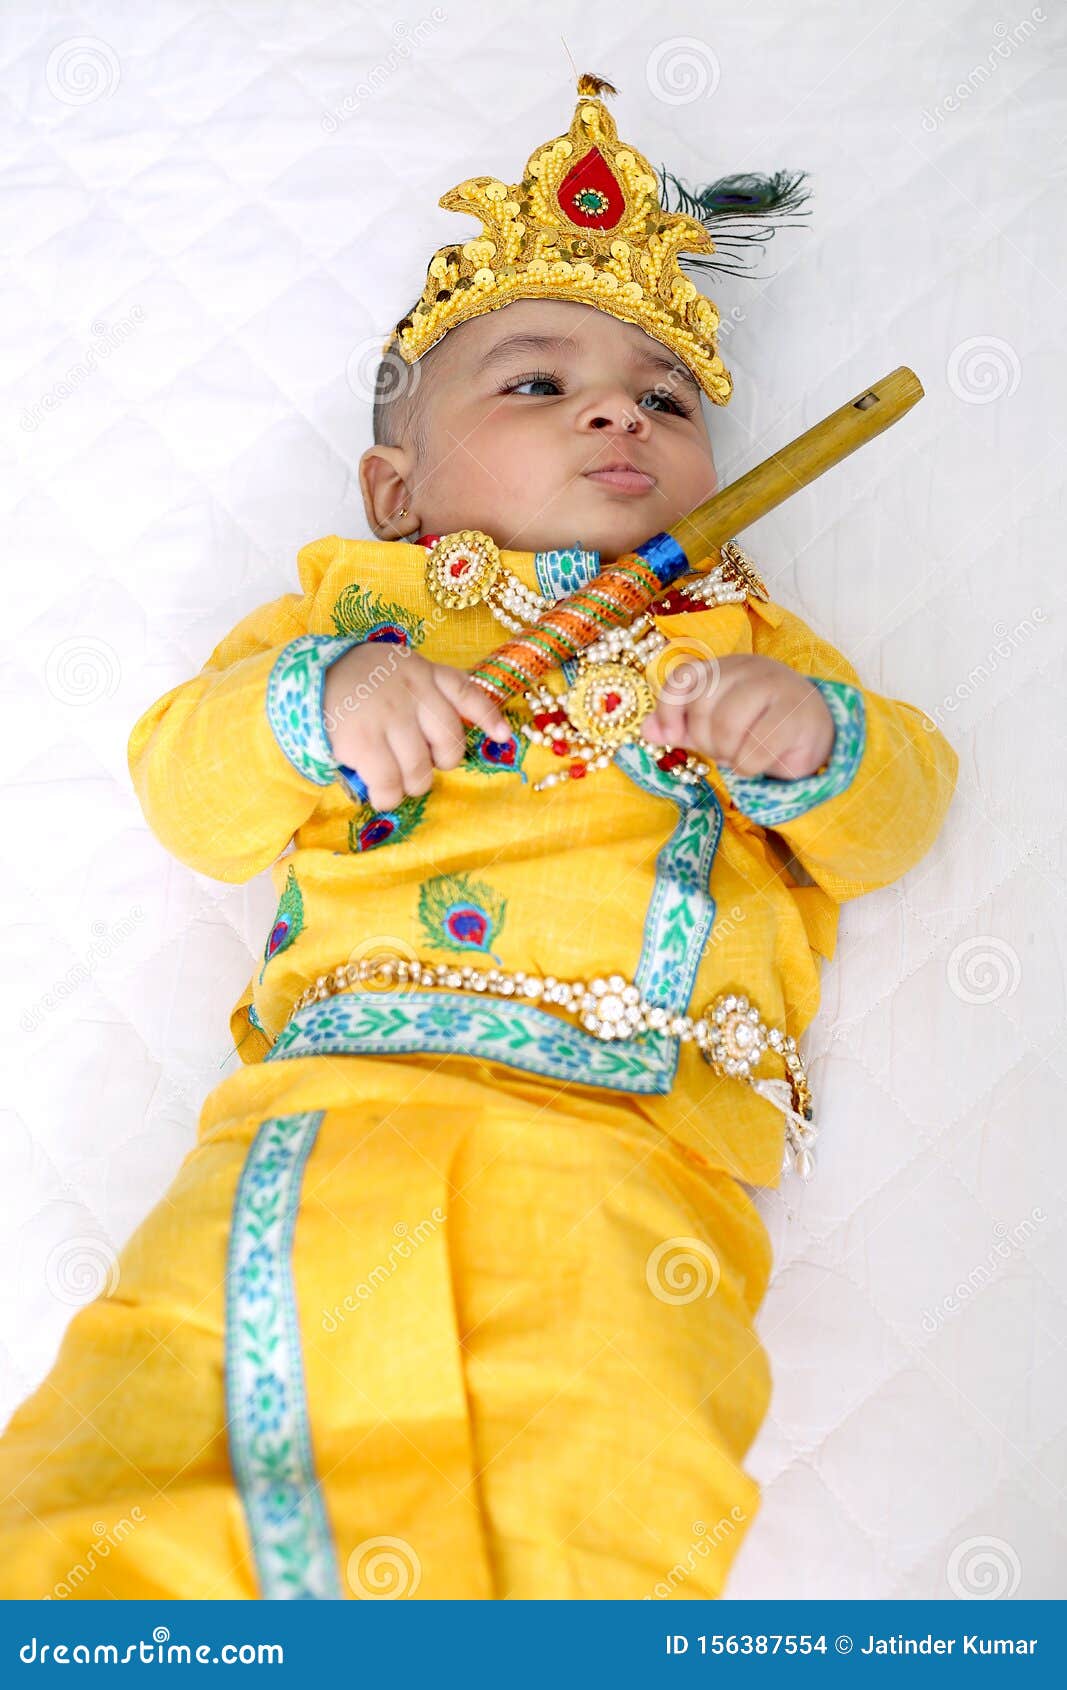 Picture of Baby krishna. stock photo. Image of epic - 156387554